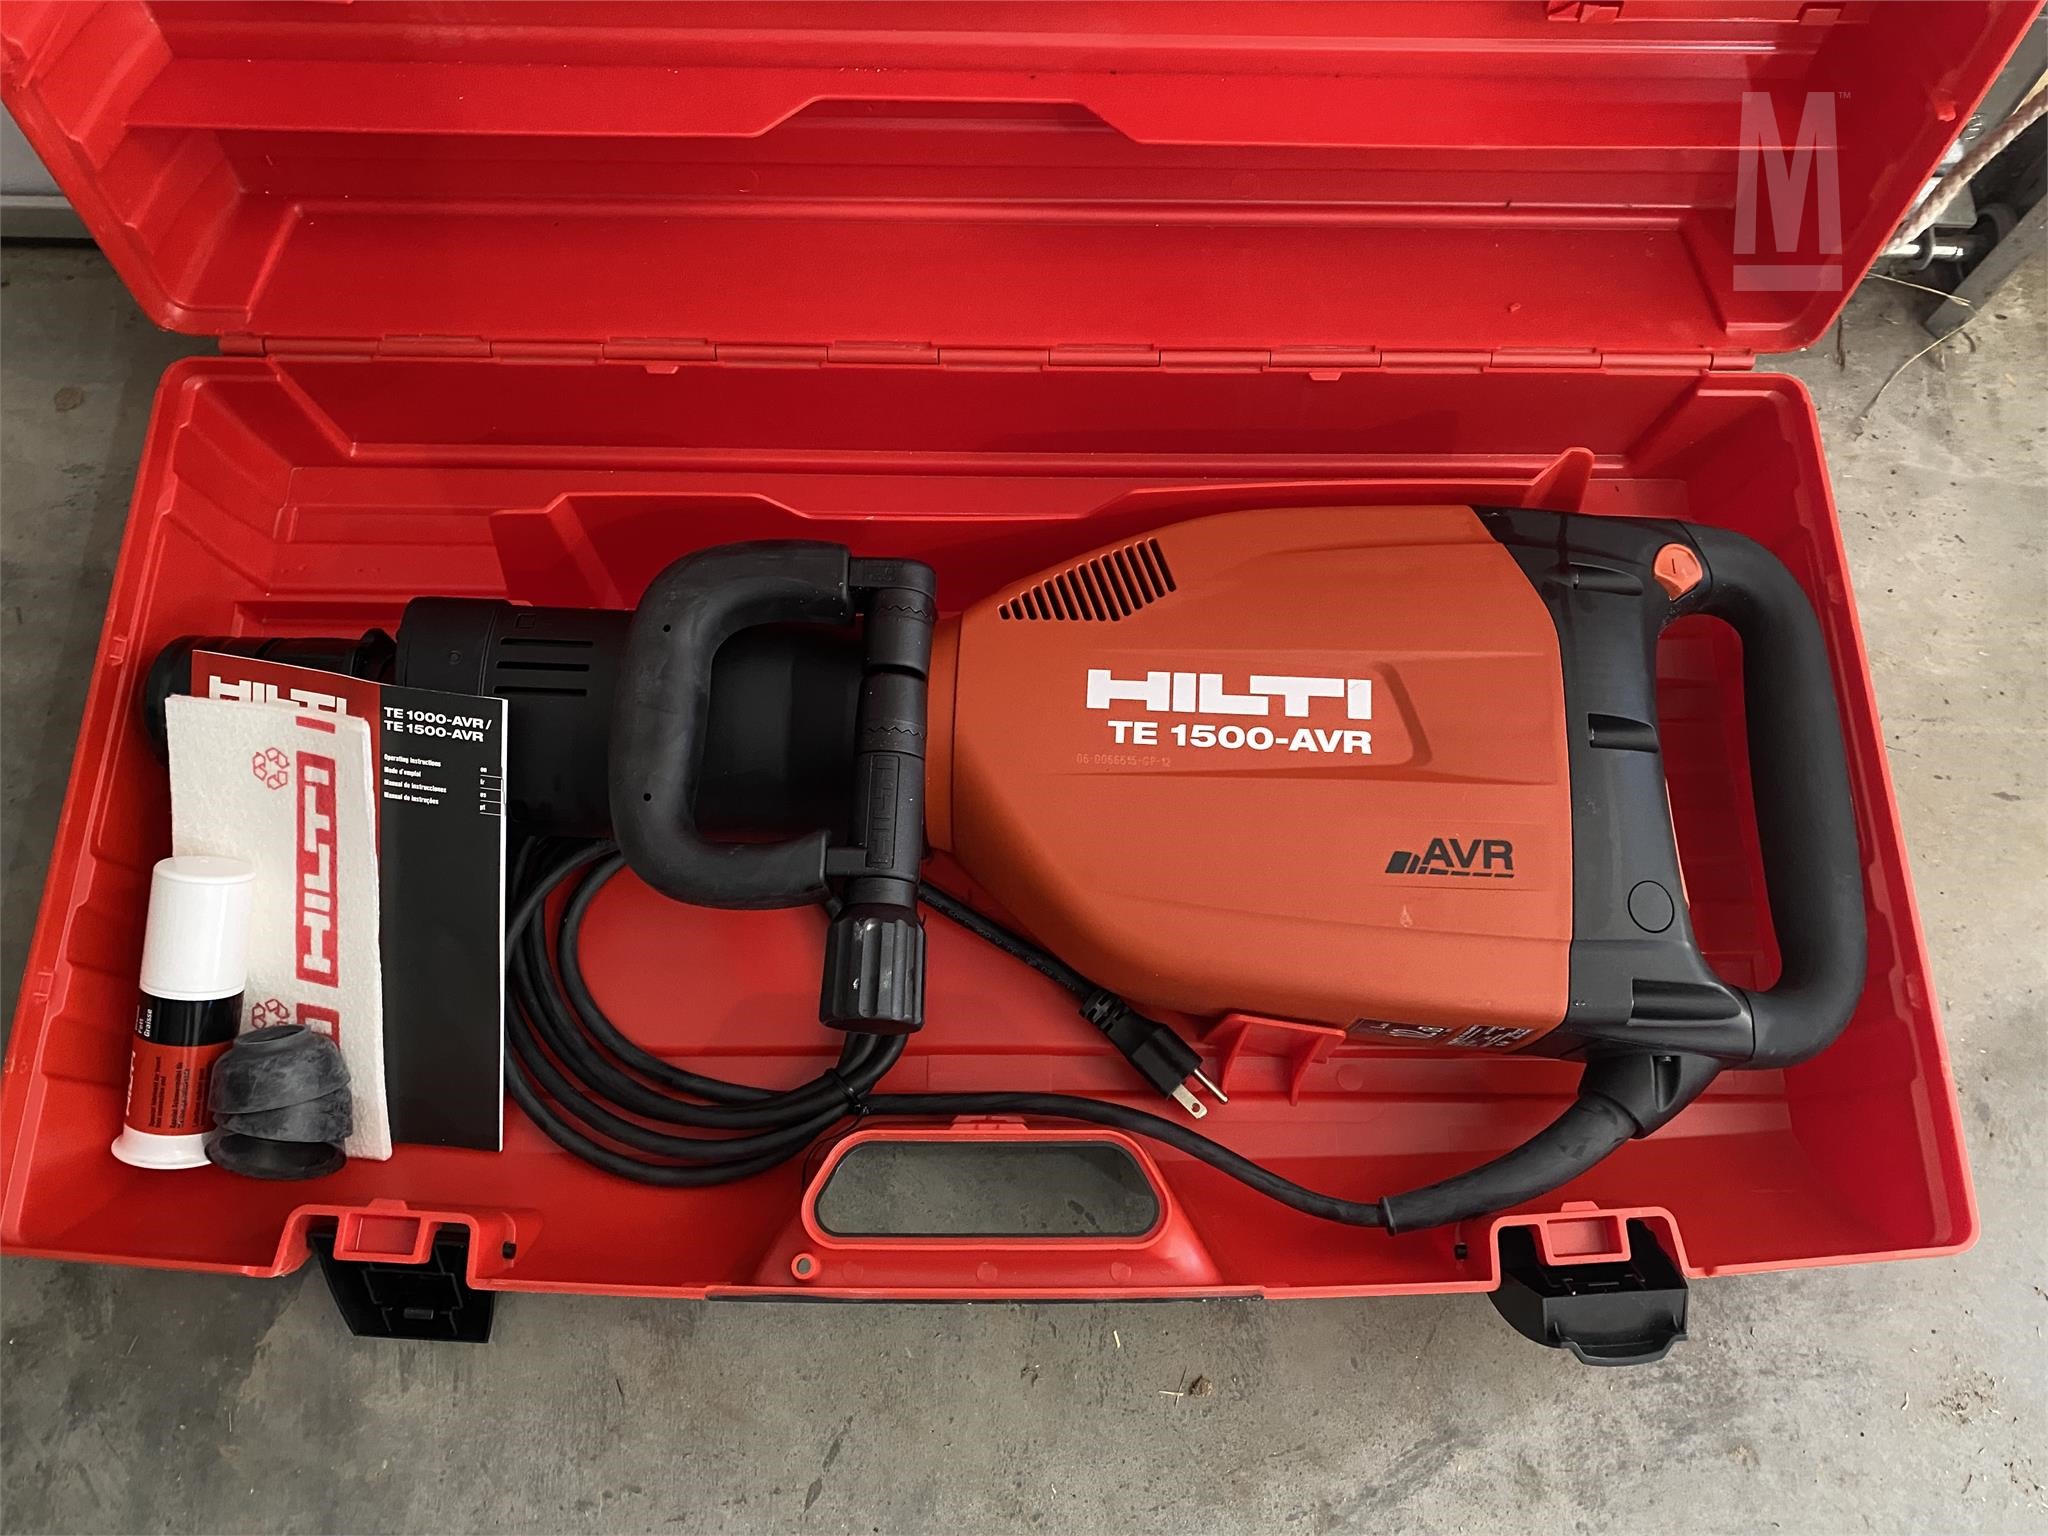 HILTI Other Items For Sale - 40 Listings | MarketBook.co.za - Page 